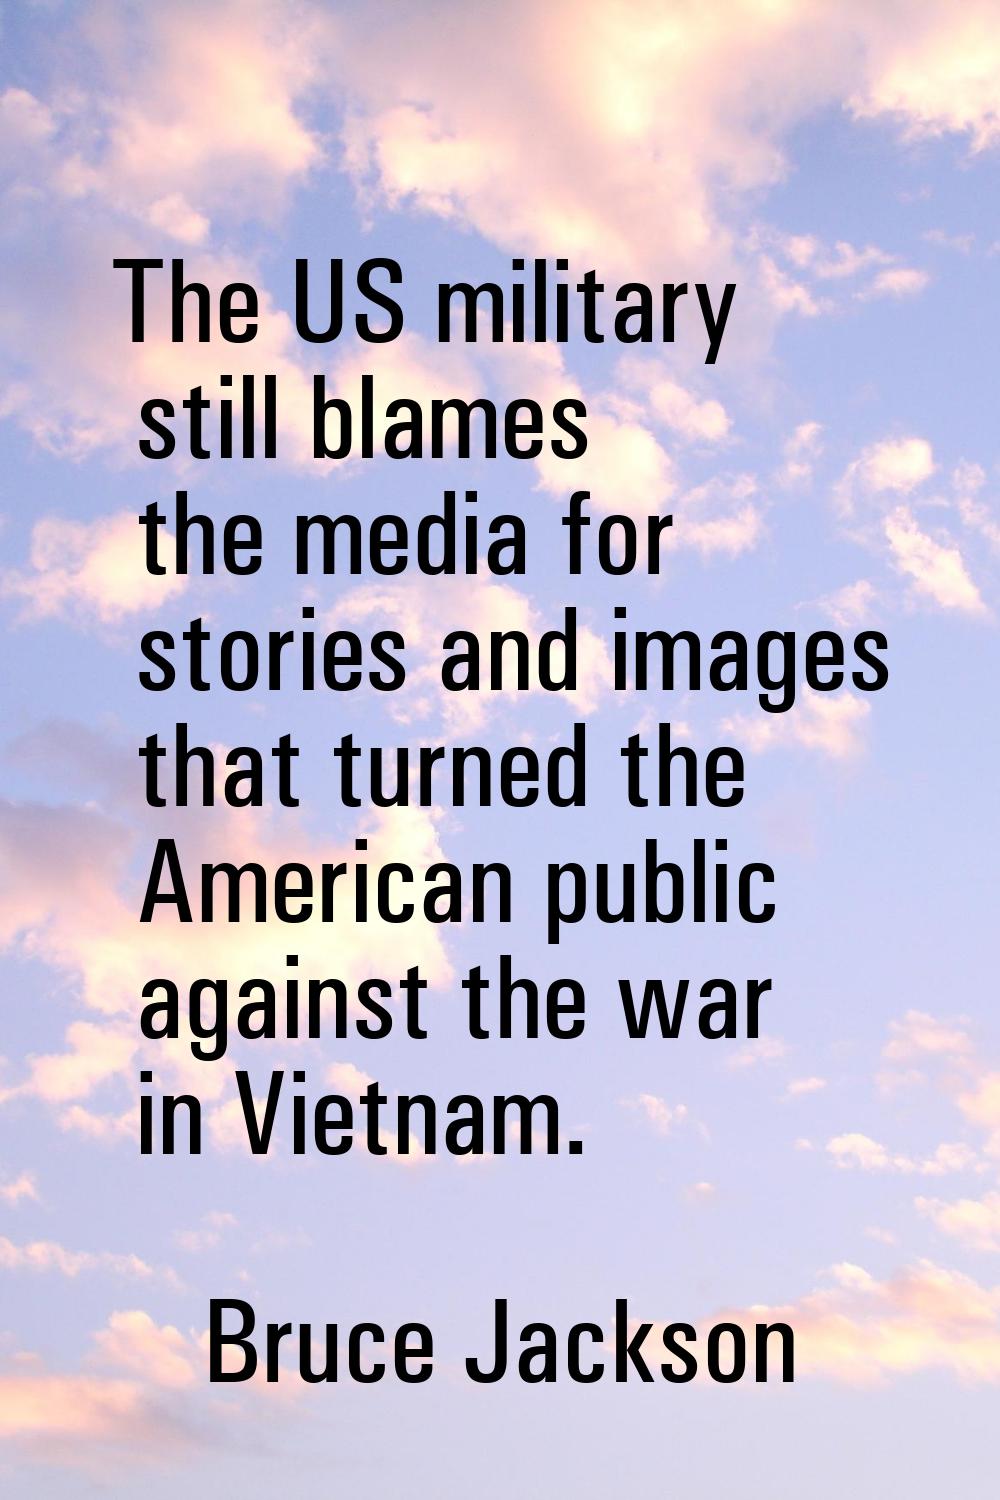 The US military still blames the media for stories and images that turned the American public again